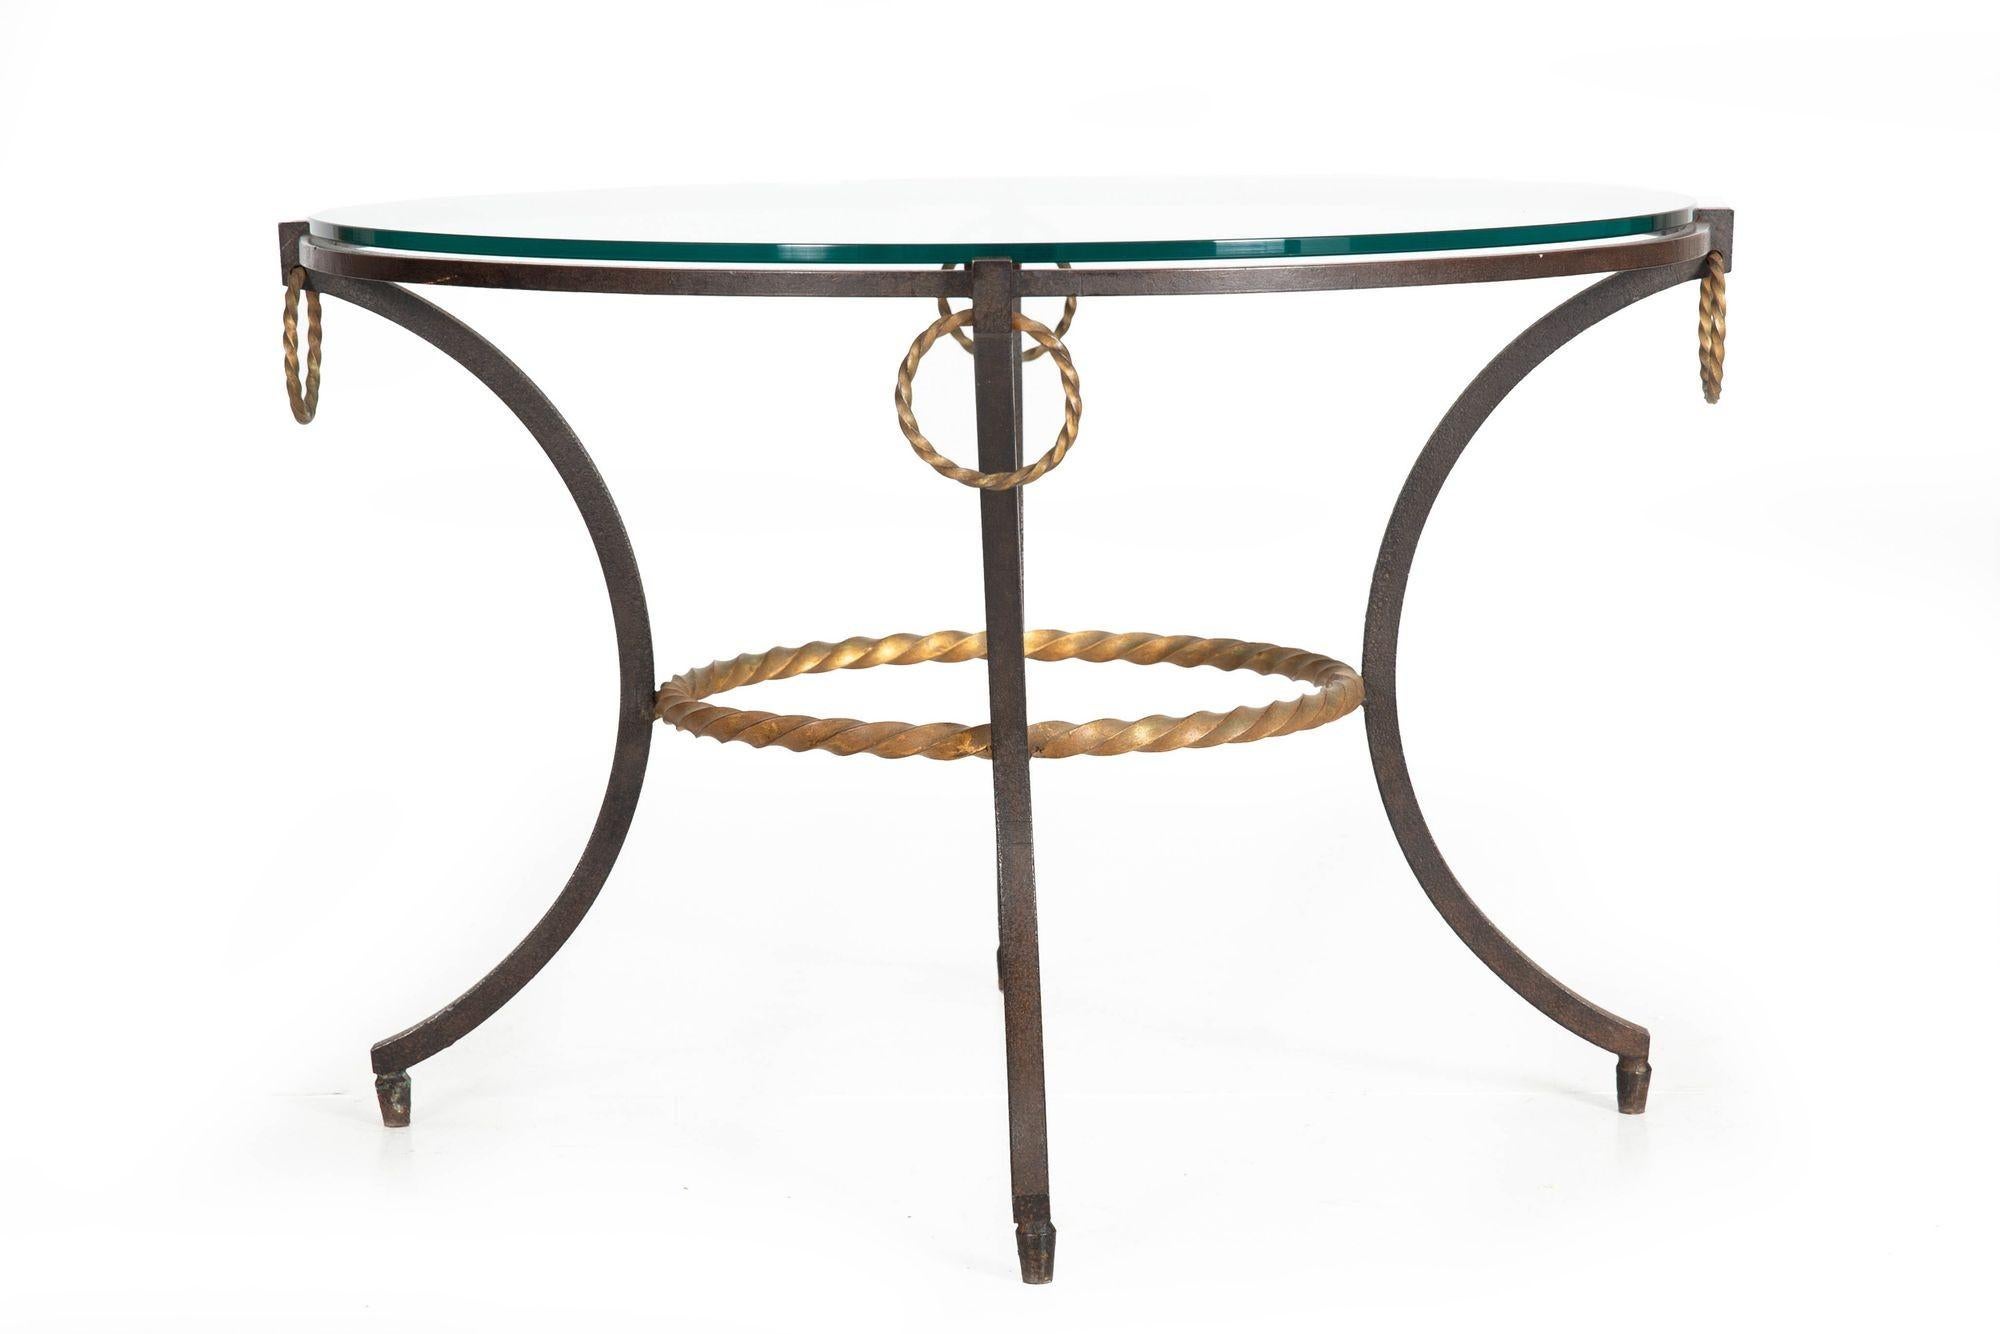 Gilt French Modernist Wrought-Iron & Glass Cocktail Side Coffee Table ca. 1950s For Sale